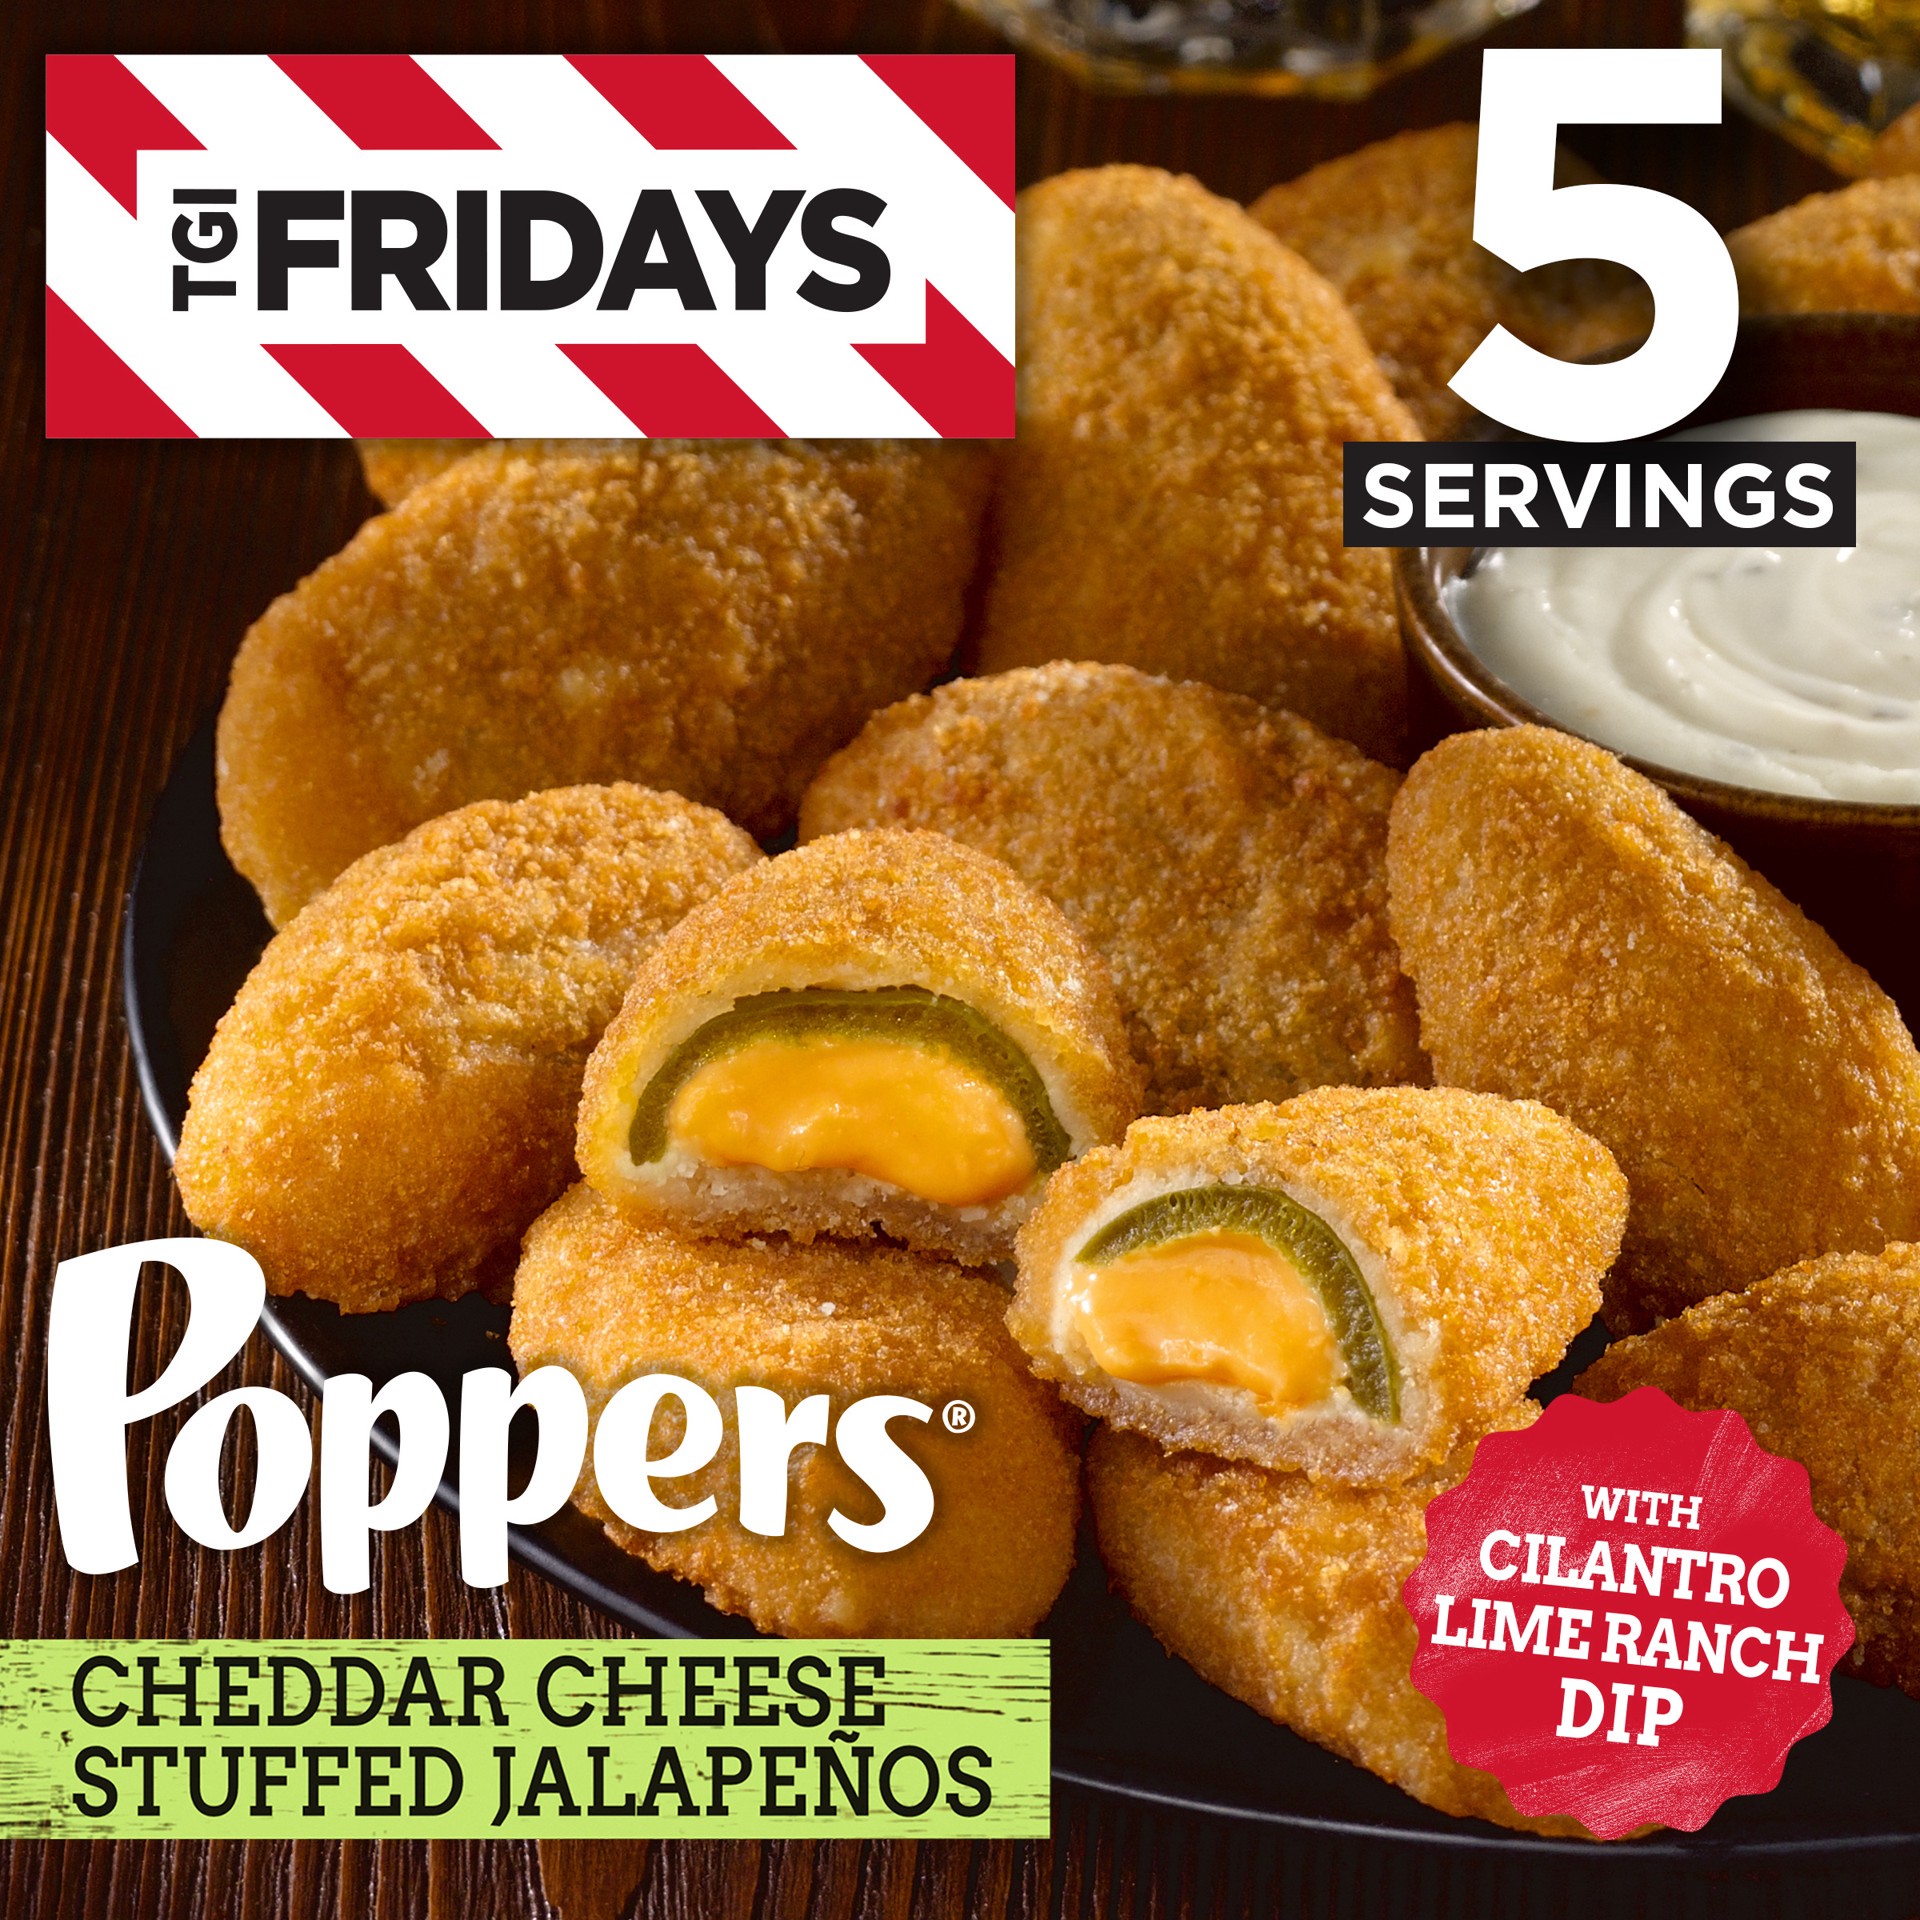 slide 1 of 9, T.G.I. Fridays TGI Fridays Frozen Appetizers Cheddar Cheese Stuffed Jalapeno Poppers with Cilantro Lime Ranch Dip, 15 oz. Box, 15 oz